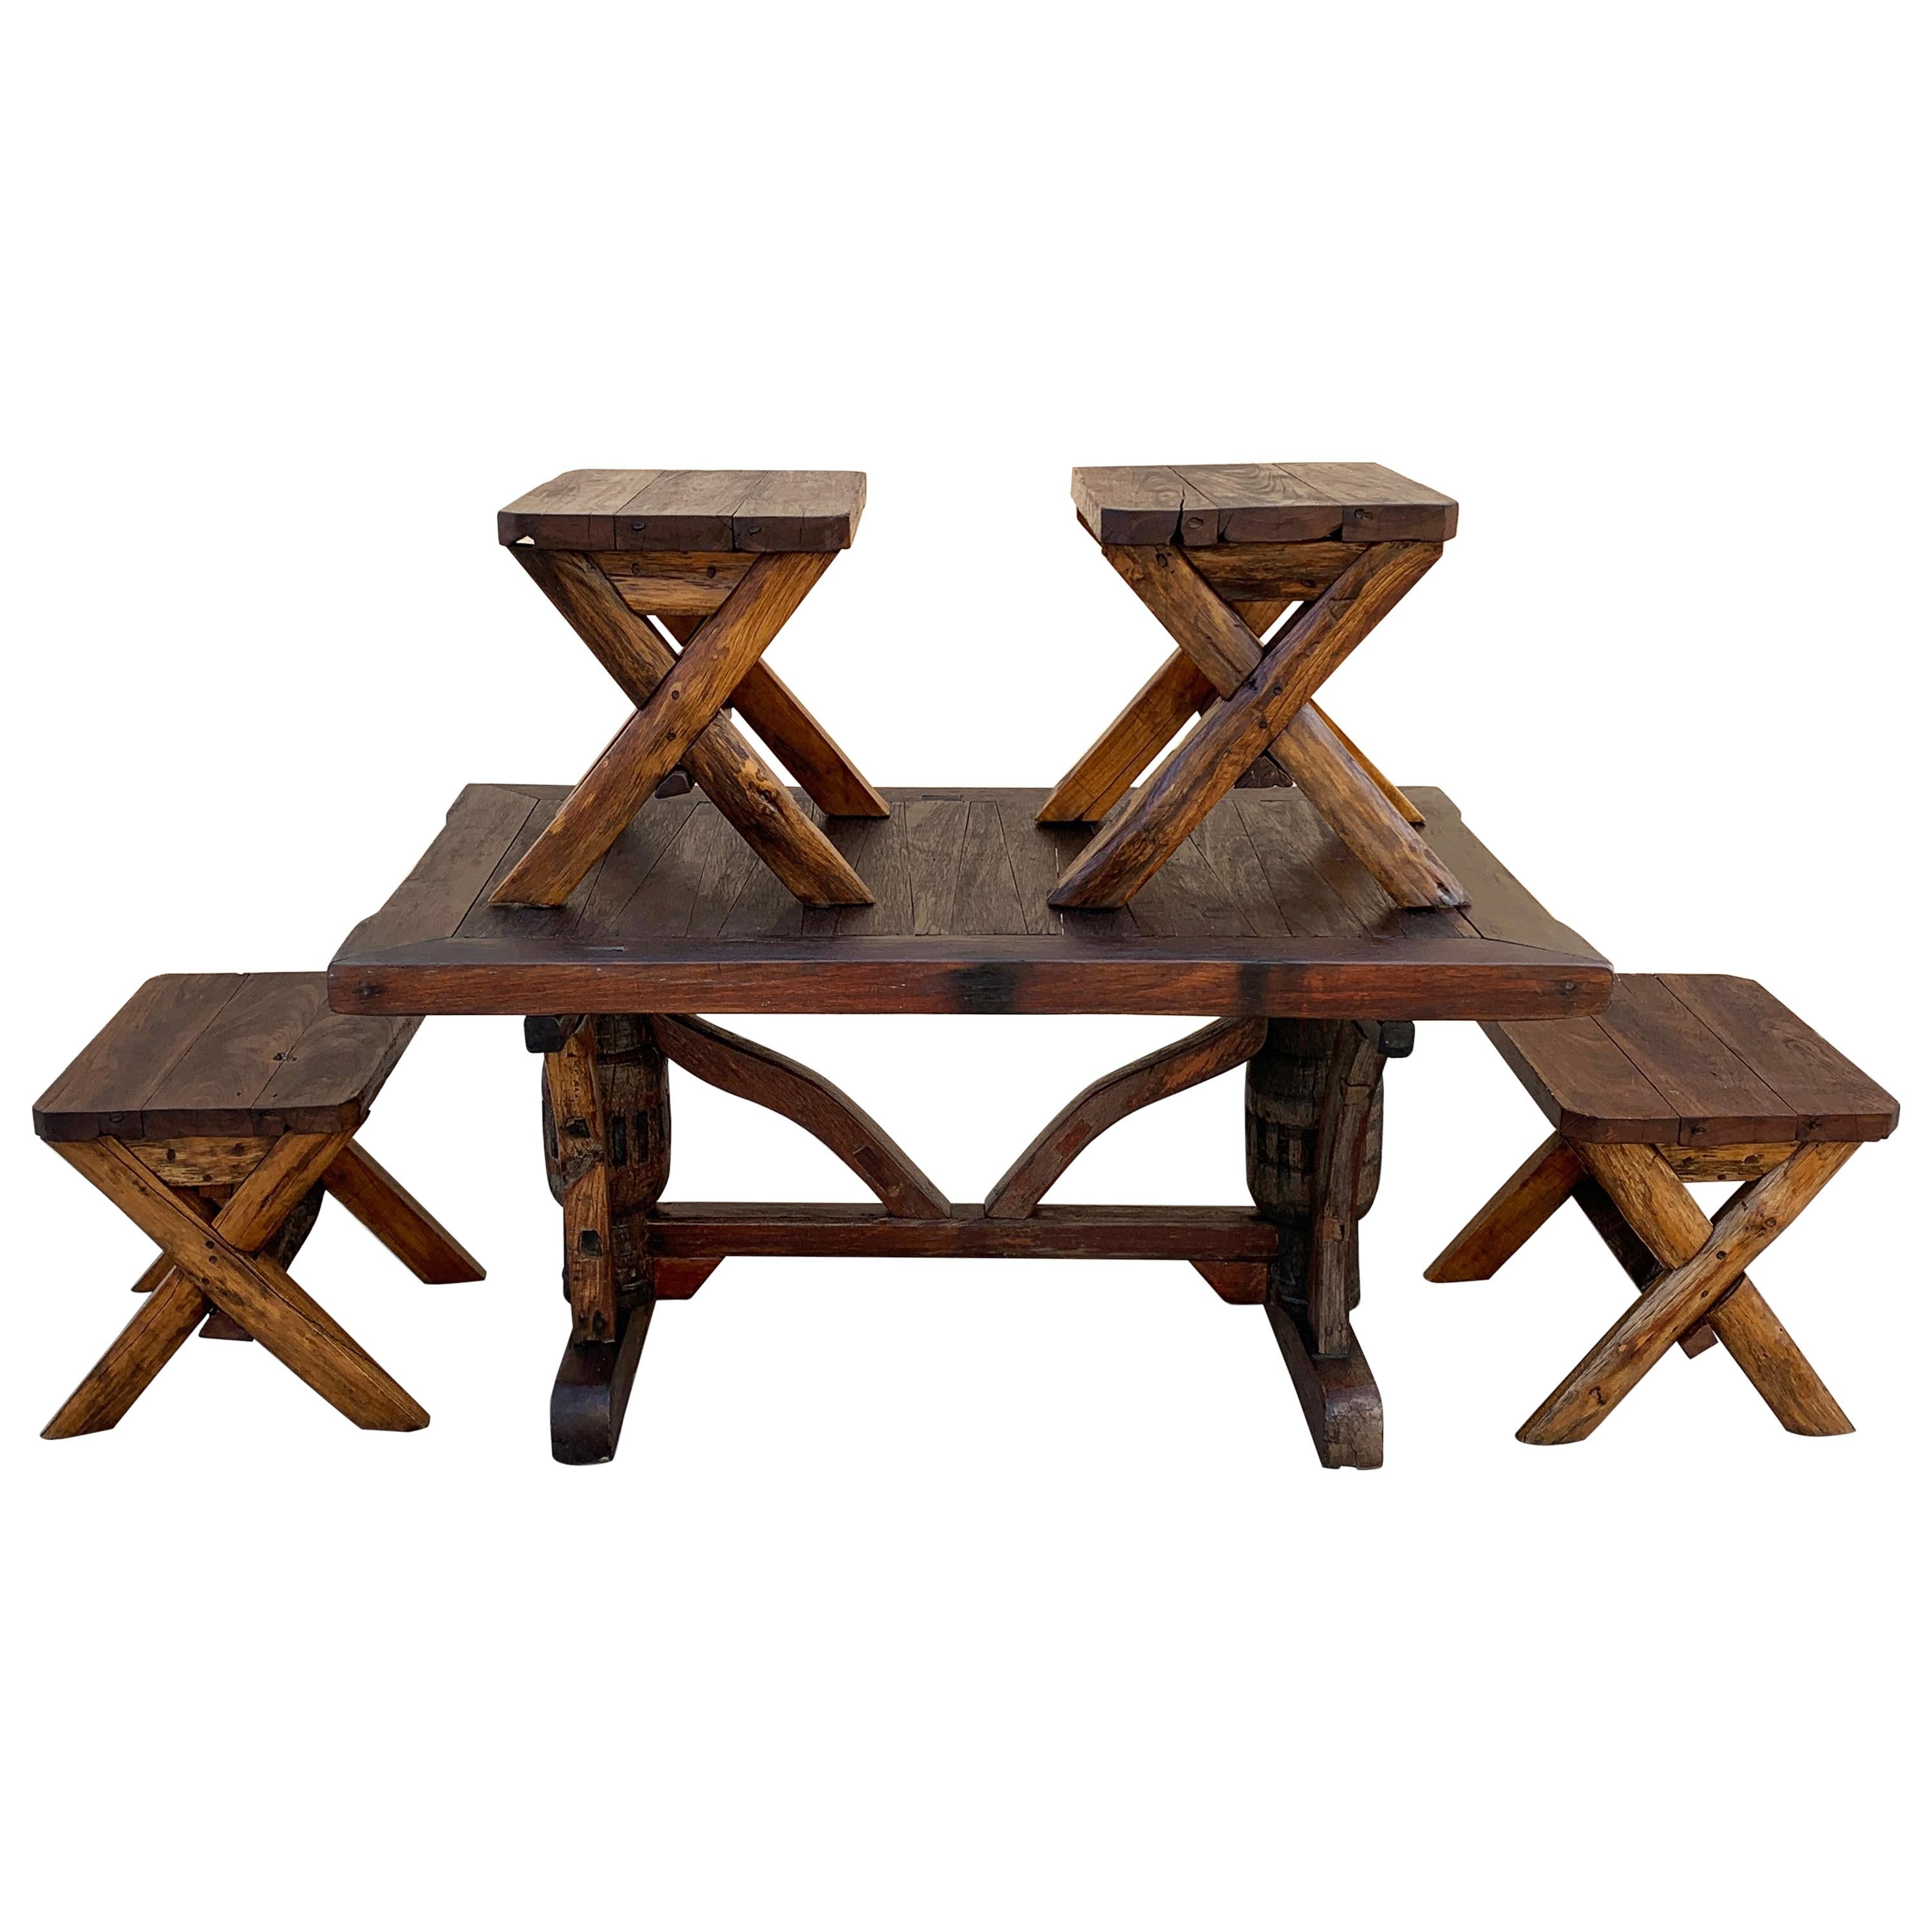 Indonesian Teak Dining Table Set with 4 Bench Seats